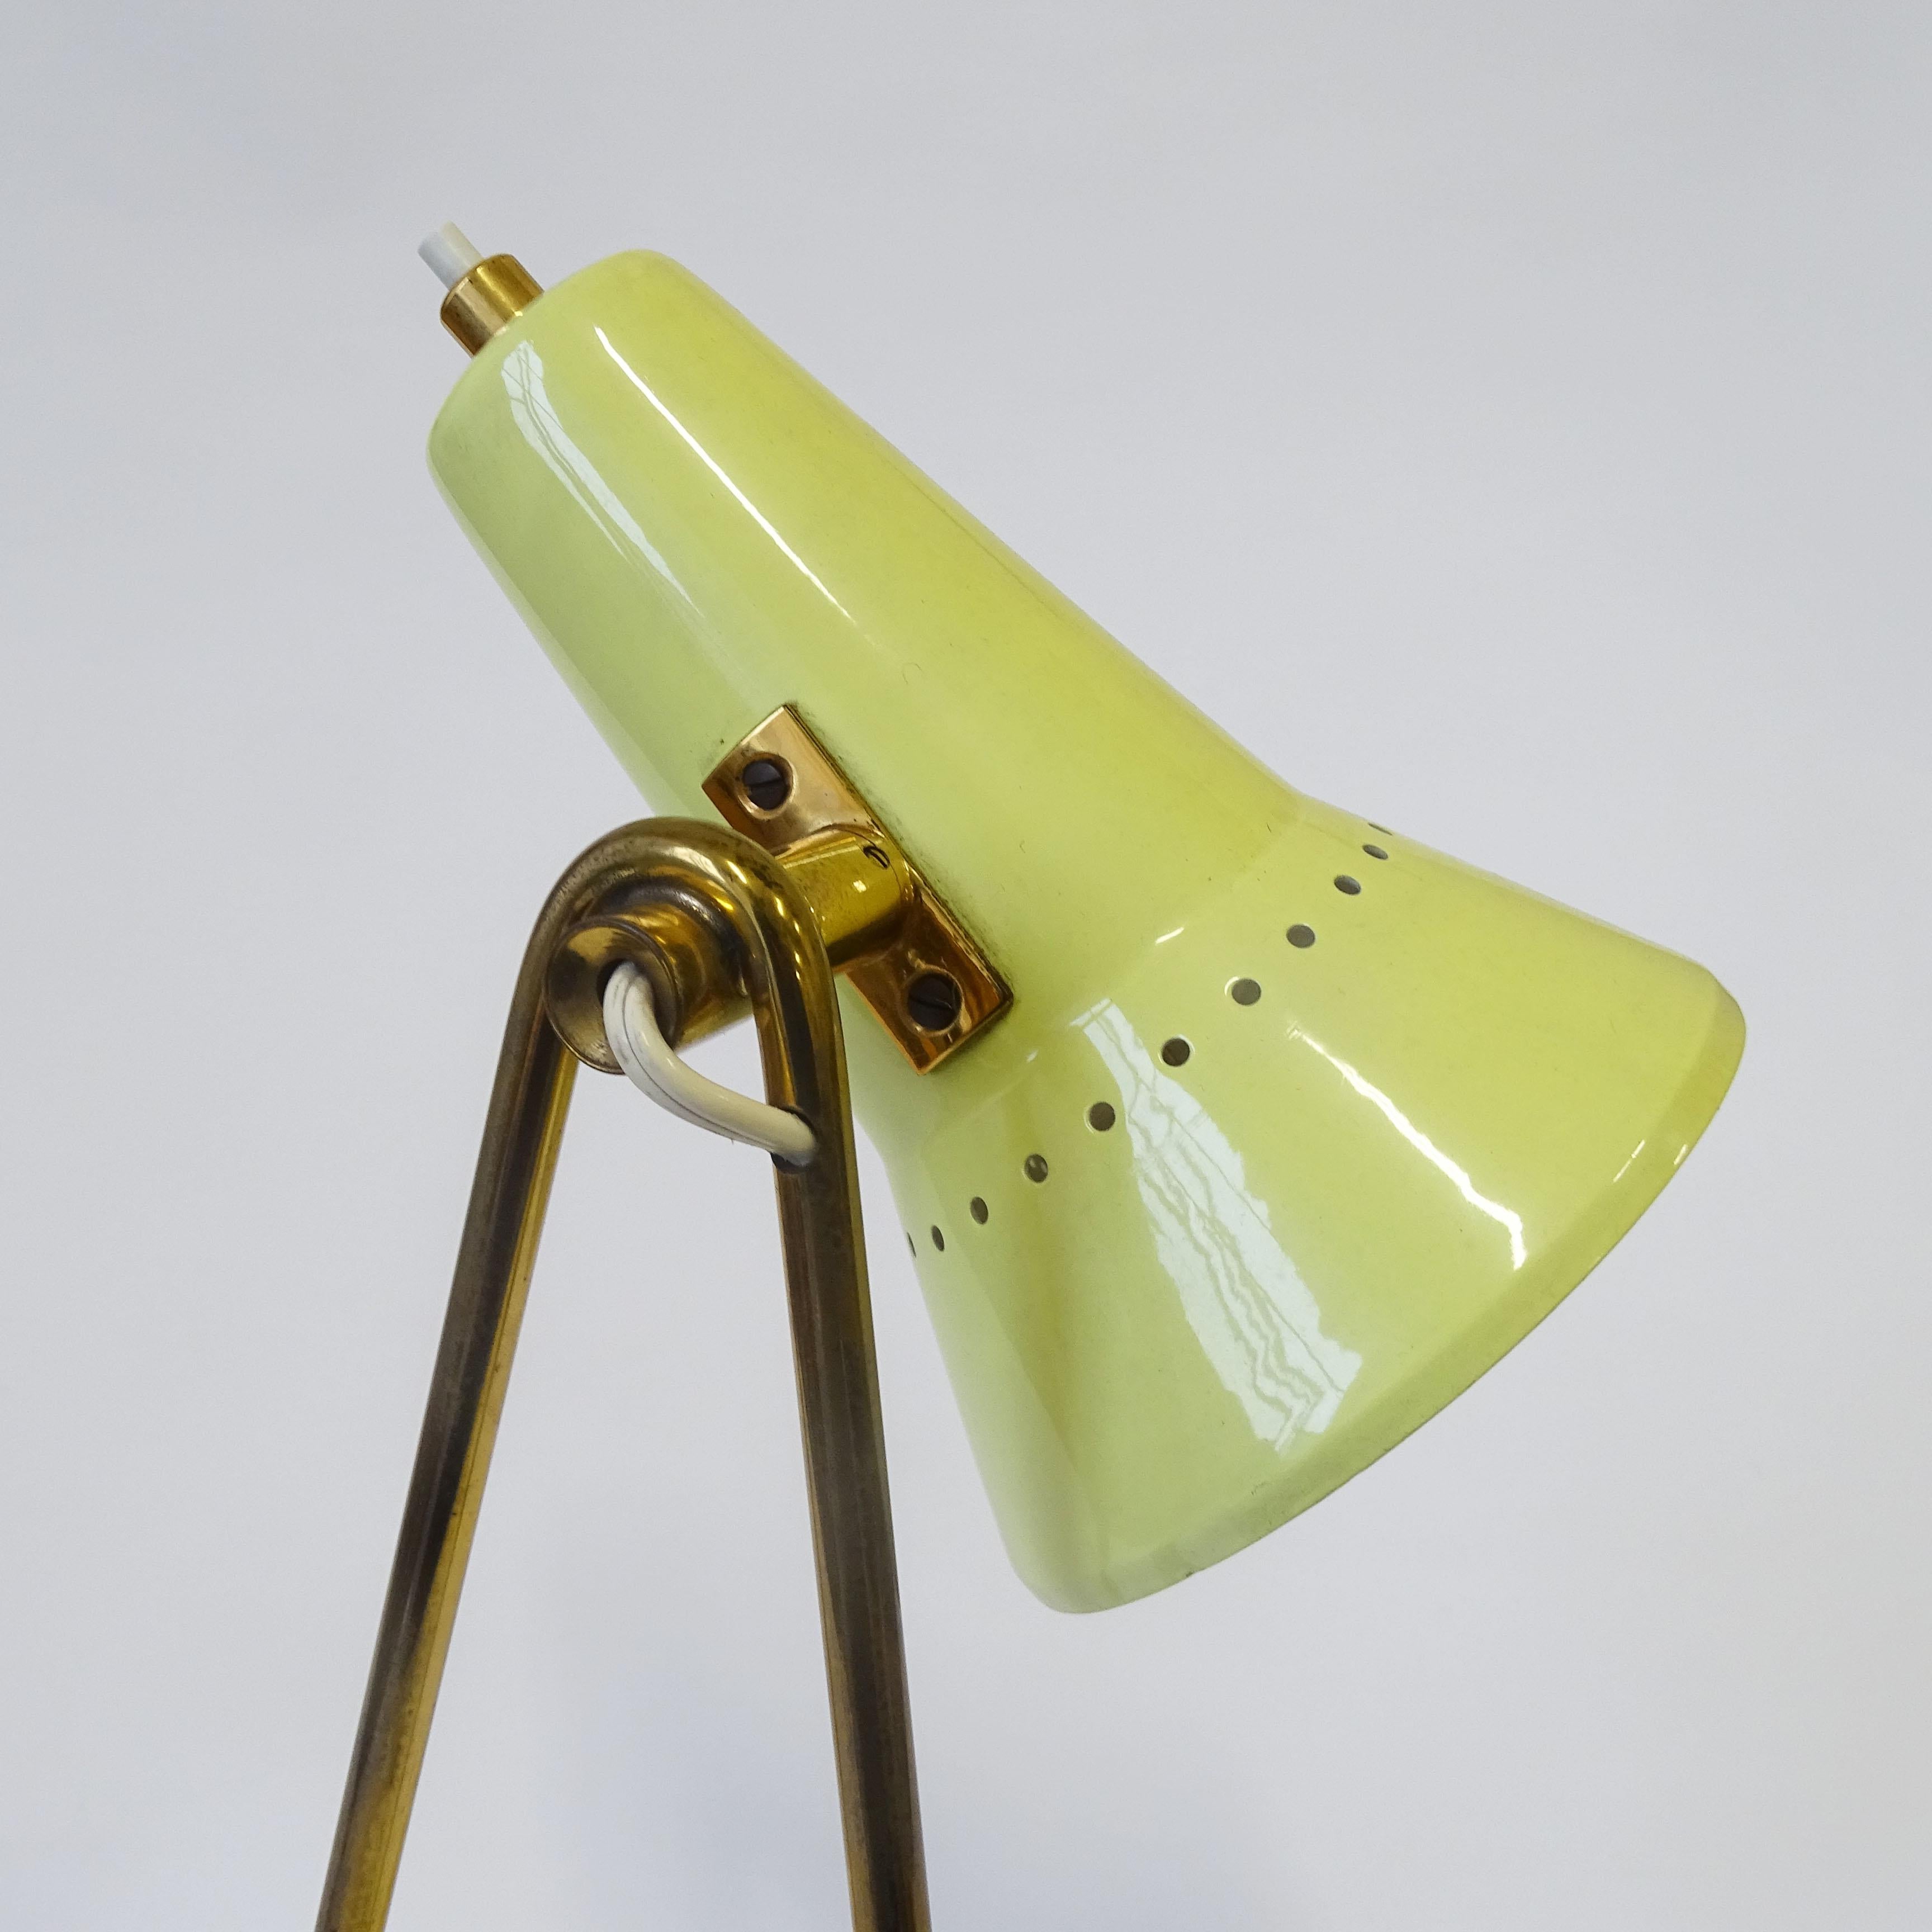 Splendid Stilnovo yellow and brass lamp, which can be used either as a wall lamp or a table lamp.
Original Stilnovo label